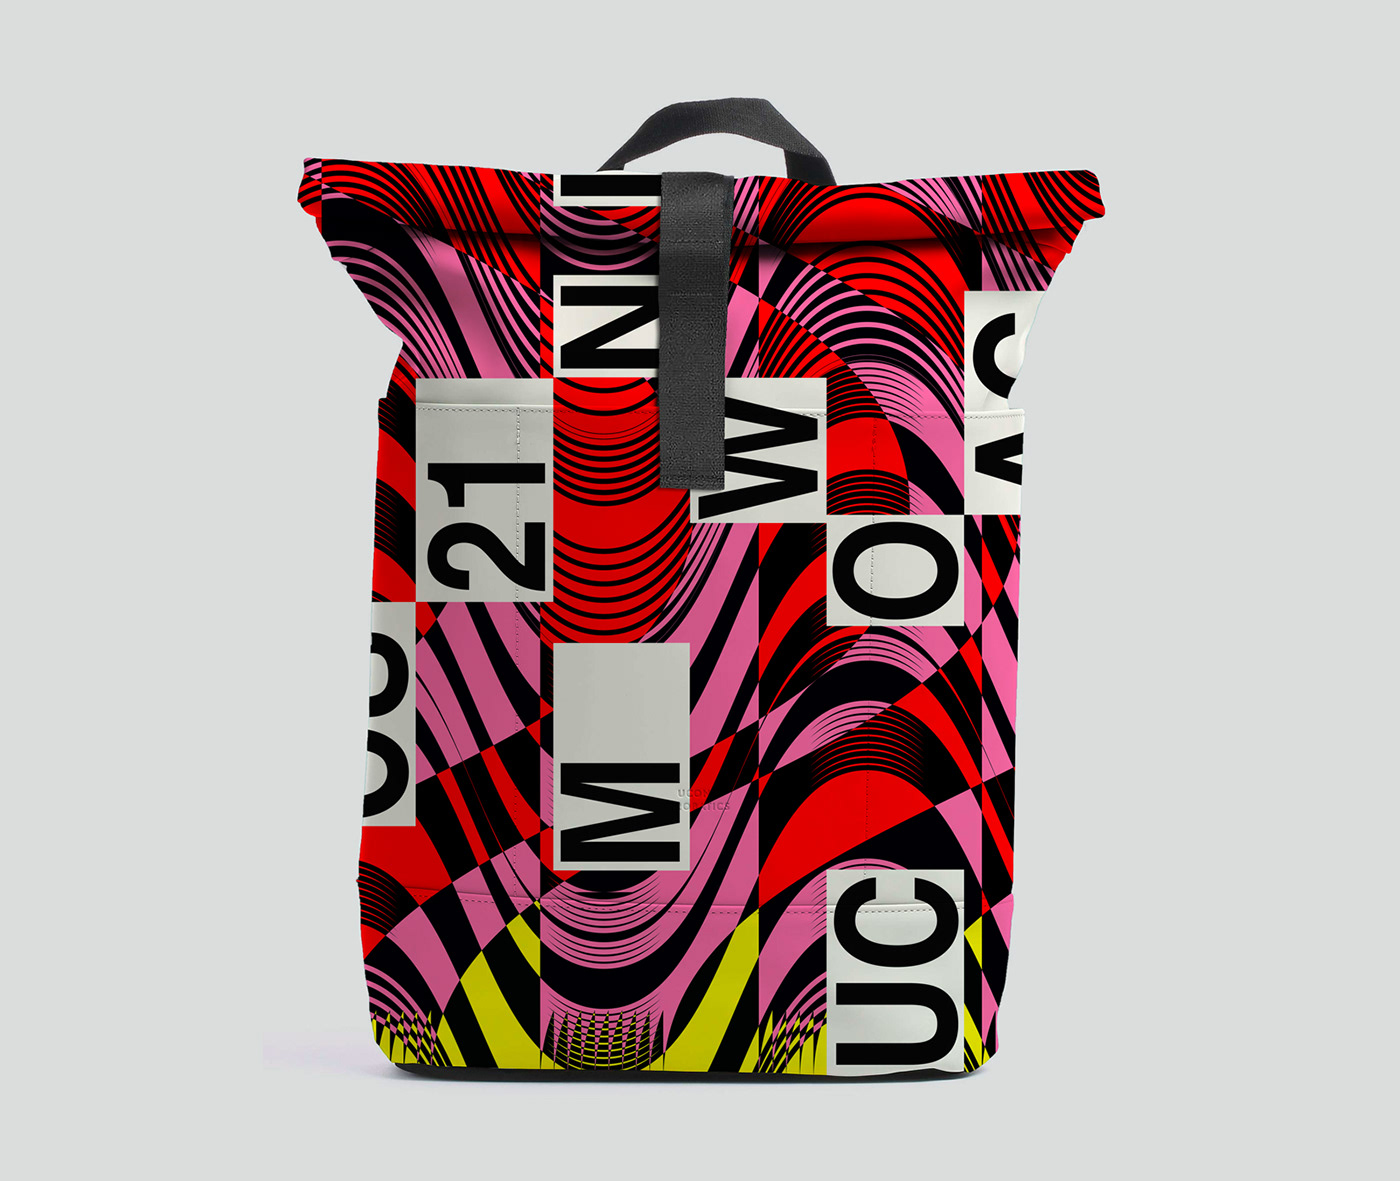 Bag designed by two graphic designers for Ucon Acrobatics